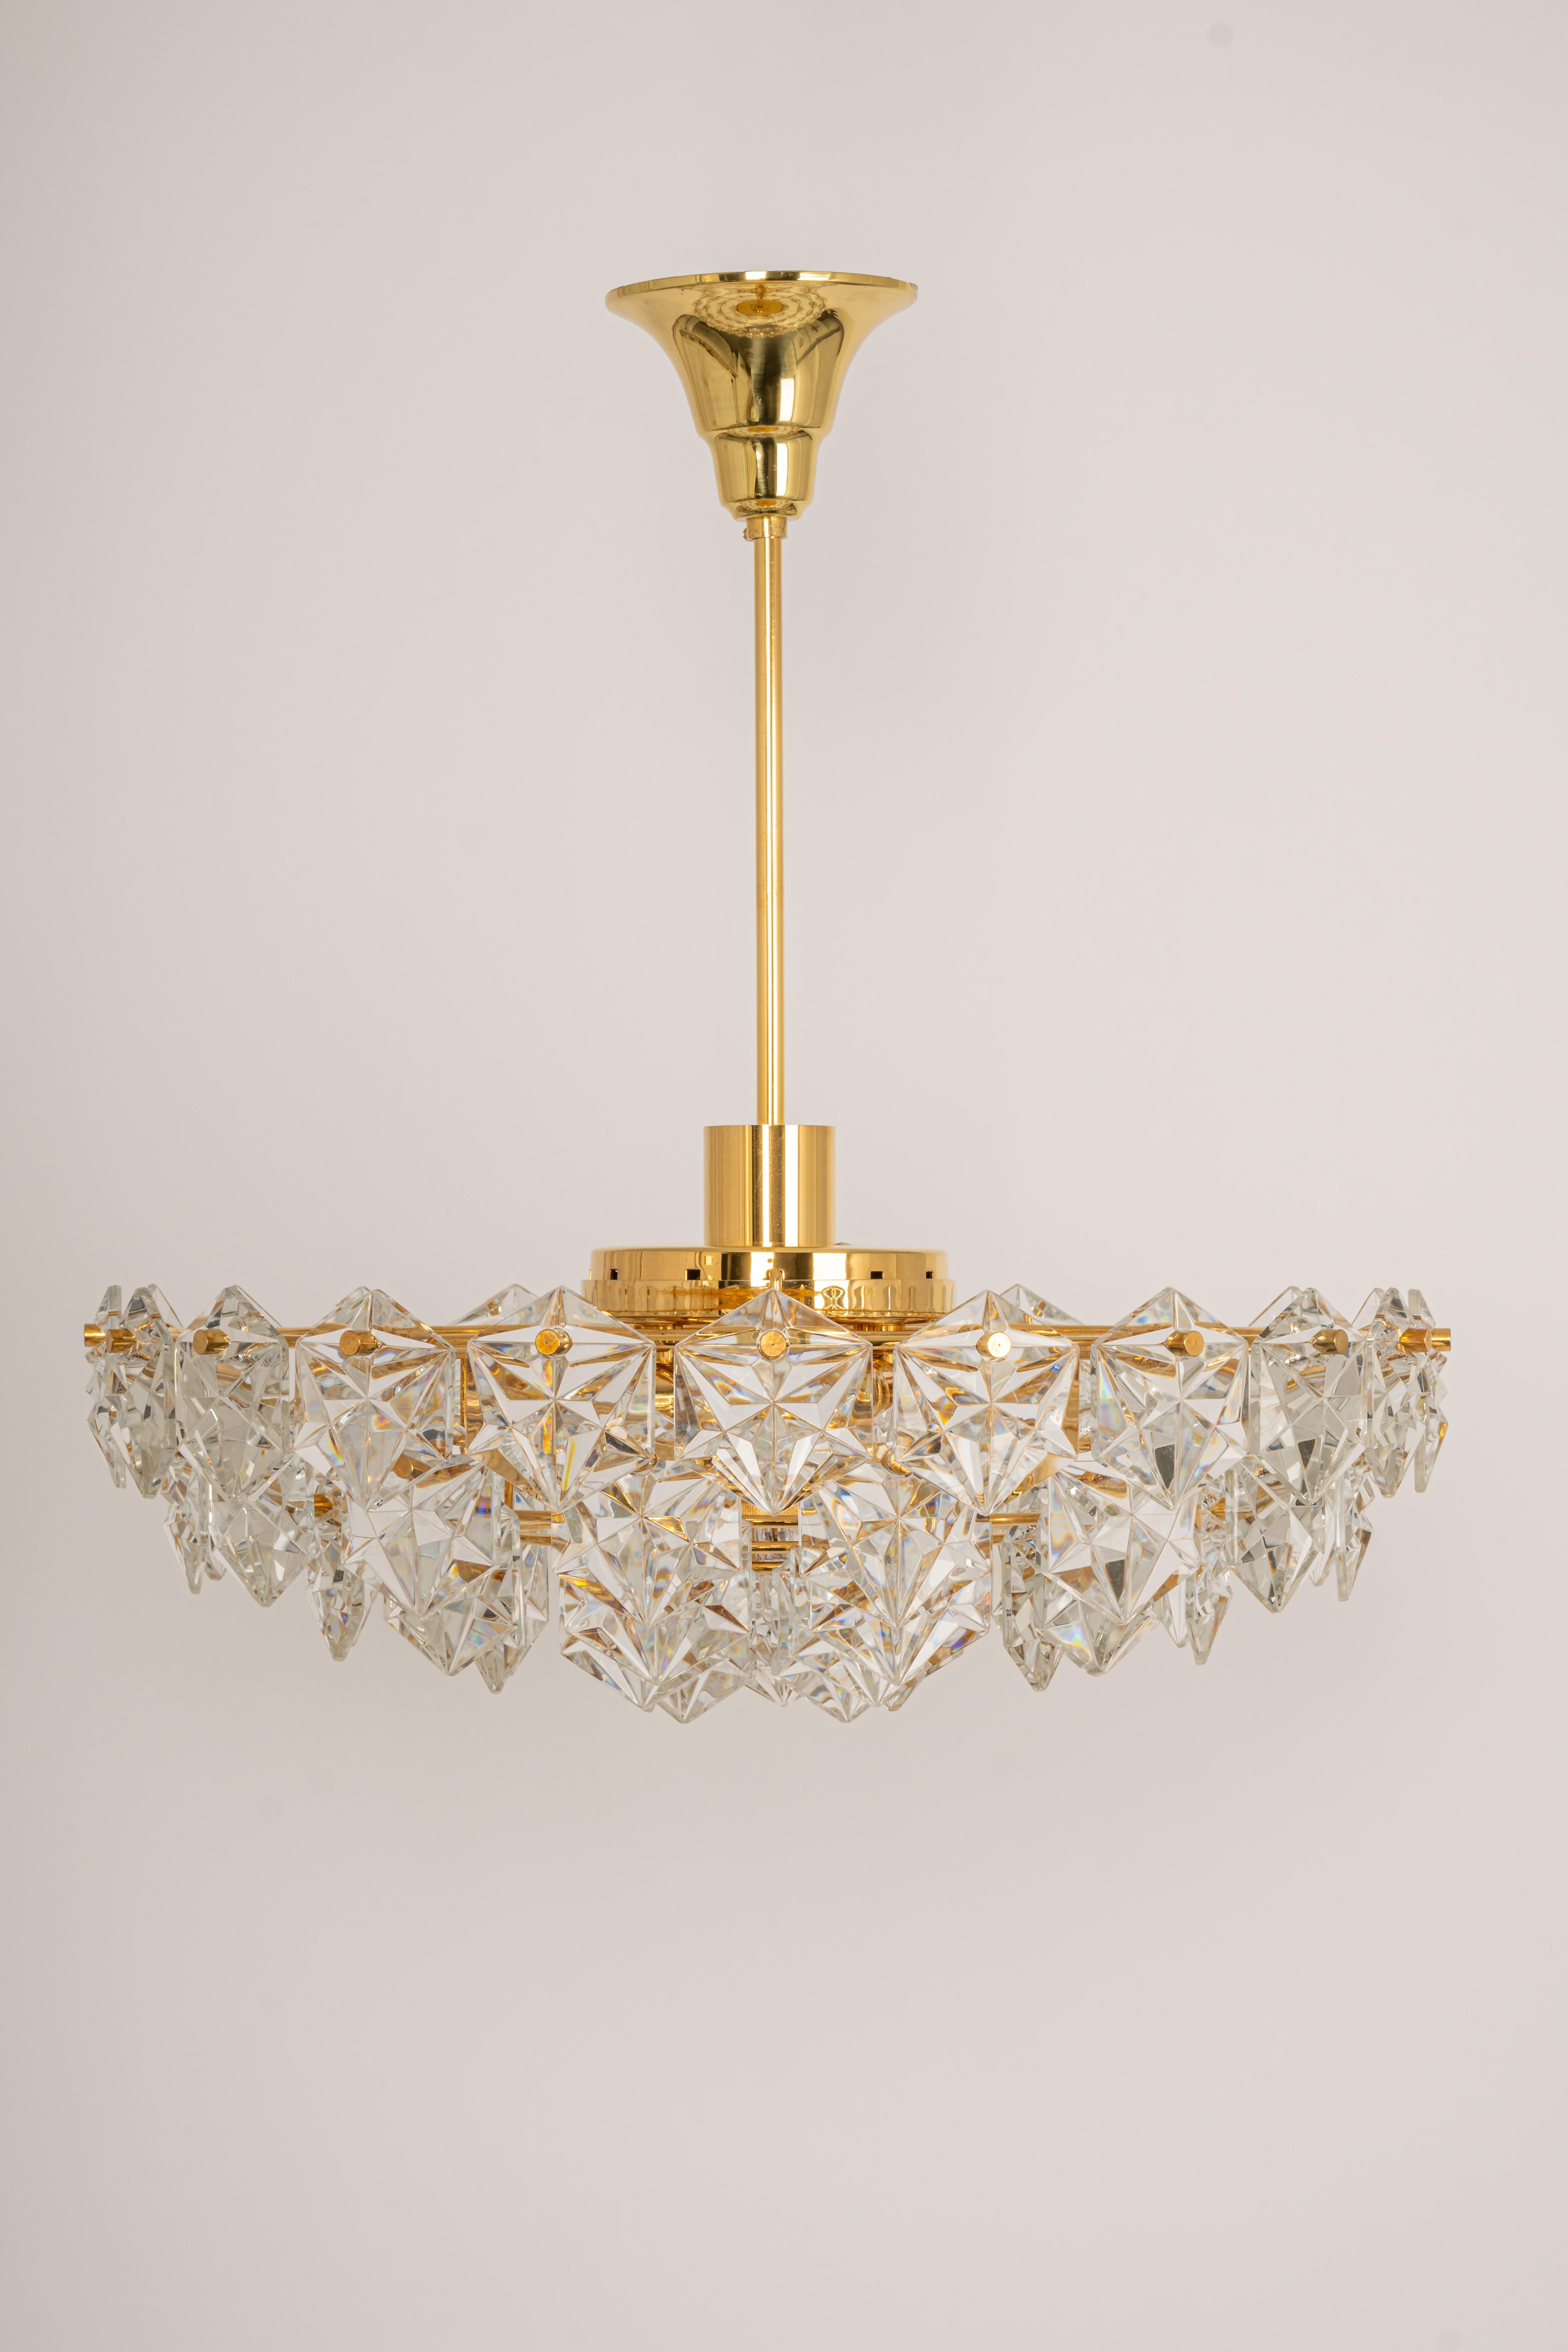 Stunning Large Chandelier, Brass and Crystal Glass by Kinkeldey, Germany, 1970s For Sale 4